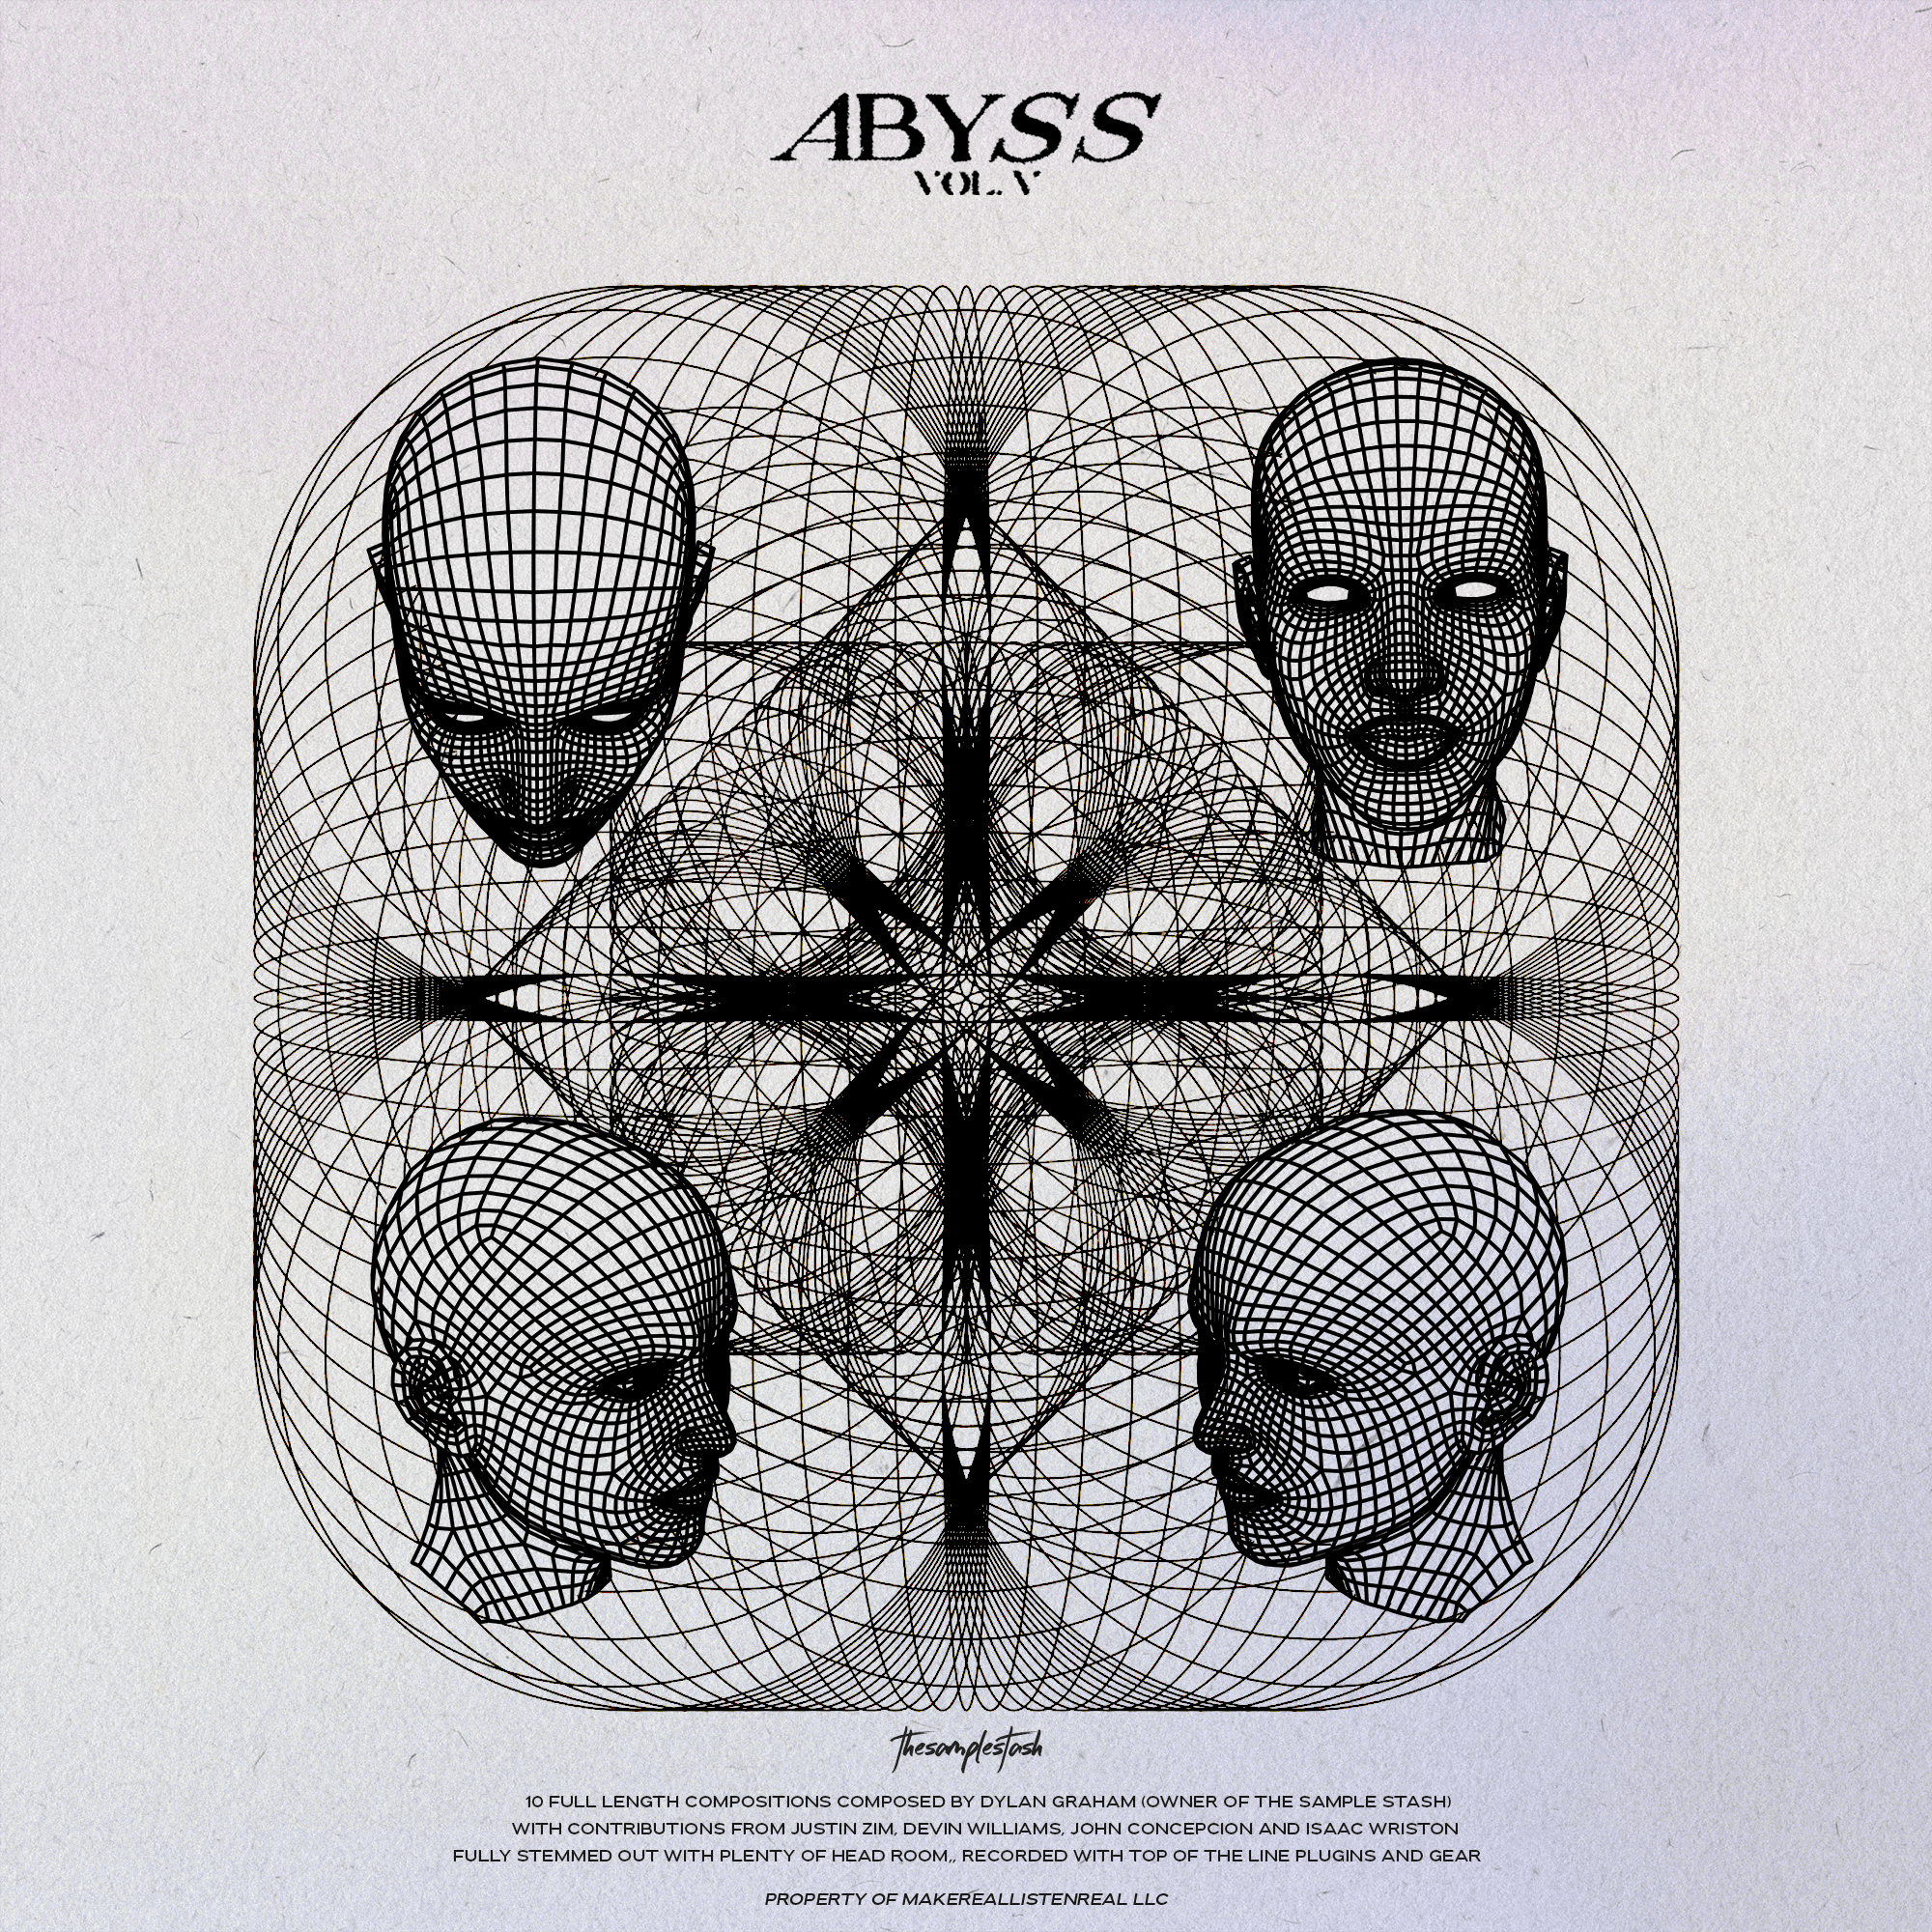 Abyss Vol. 5 - The Sample Lab